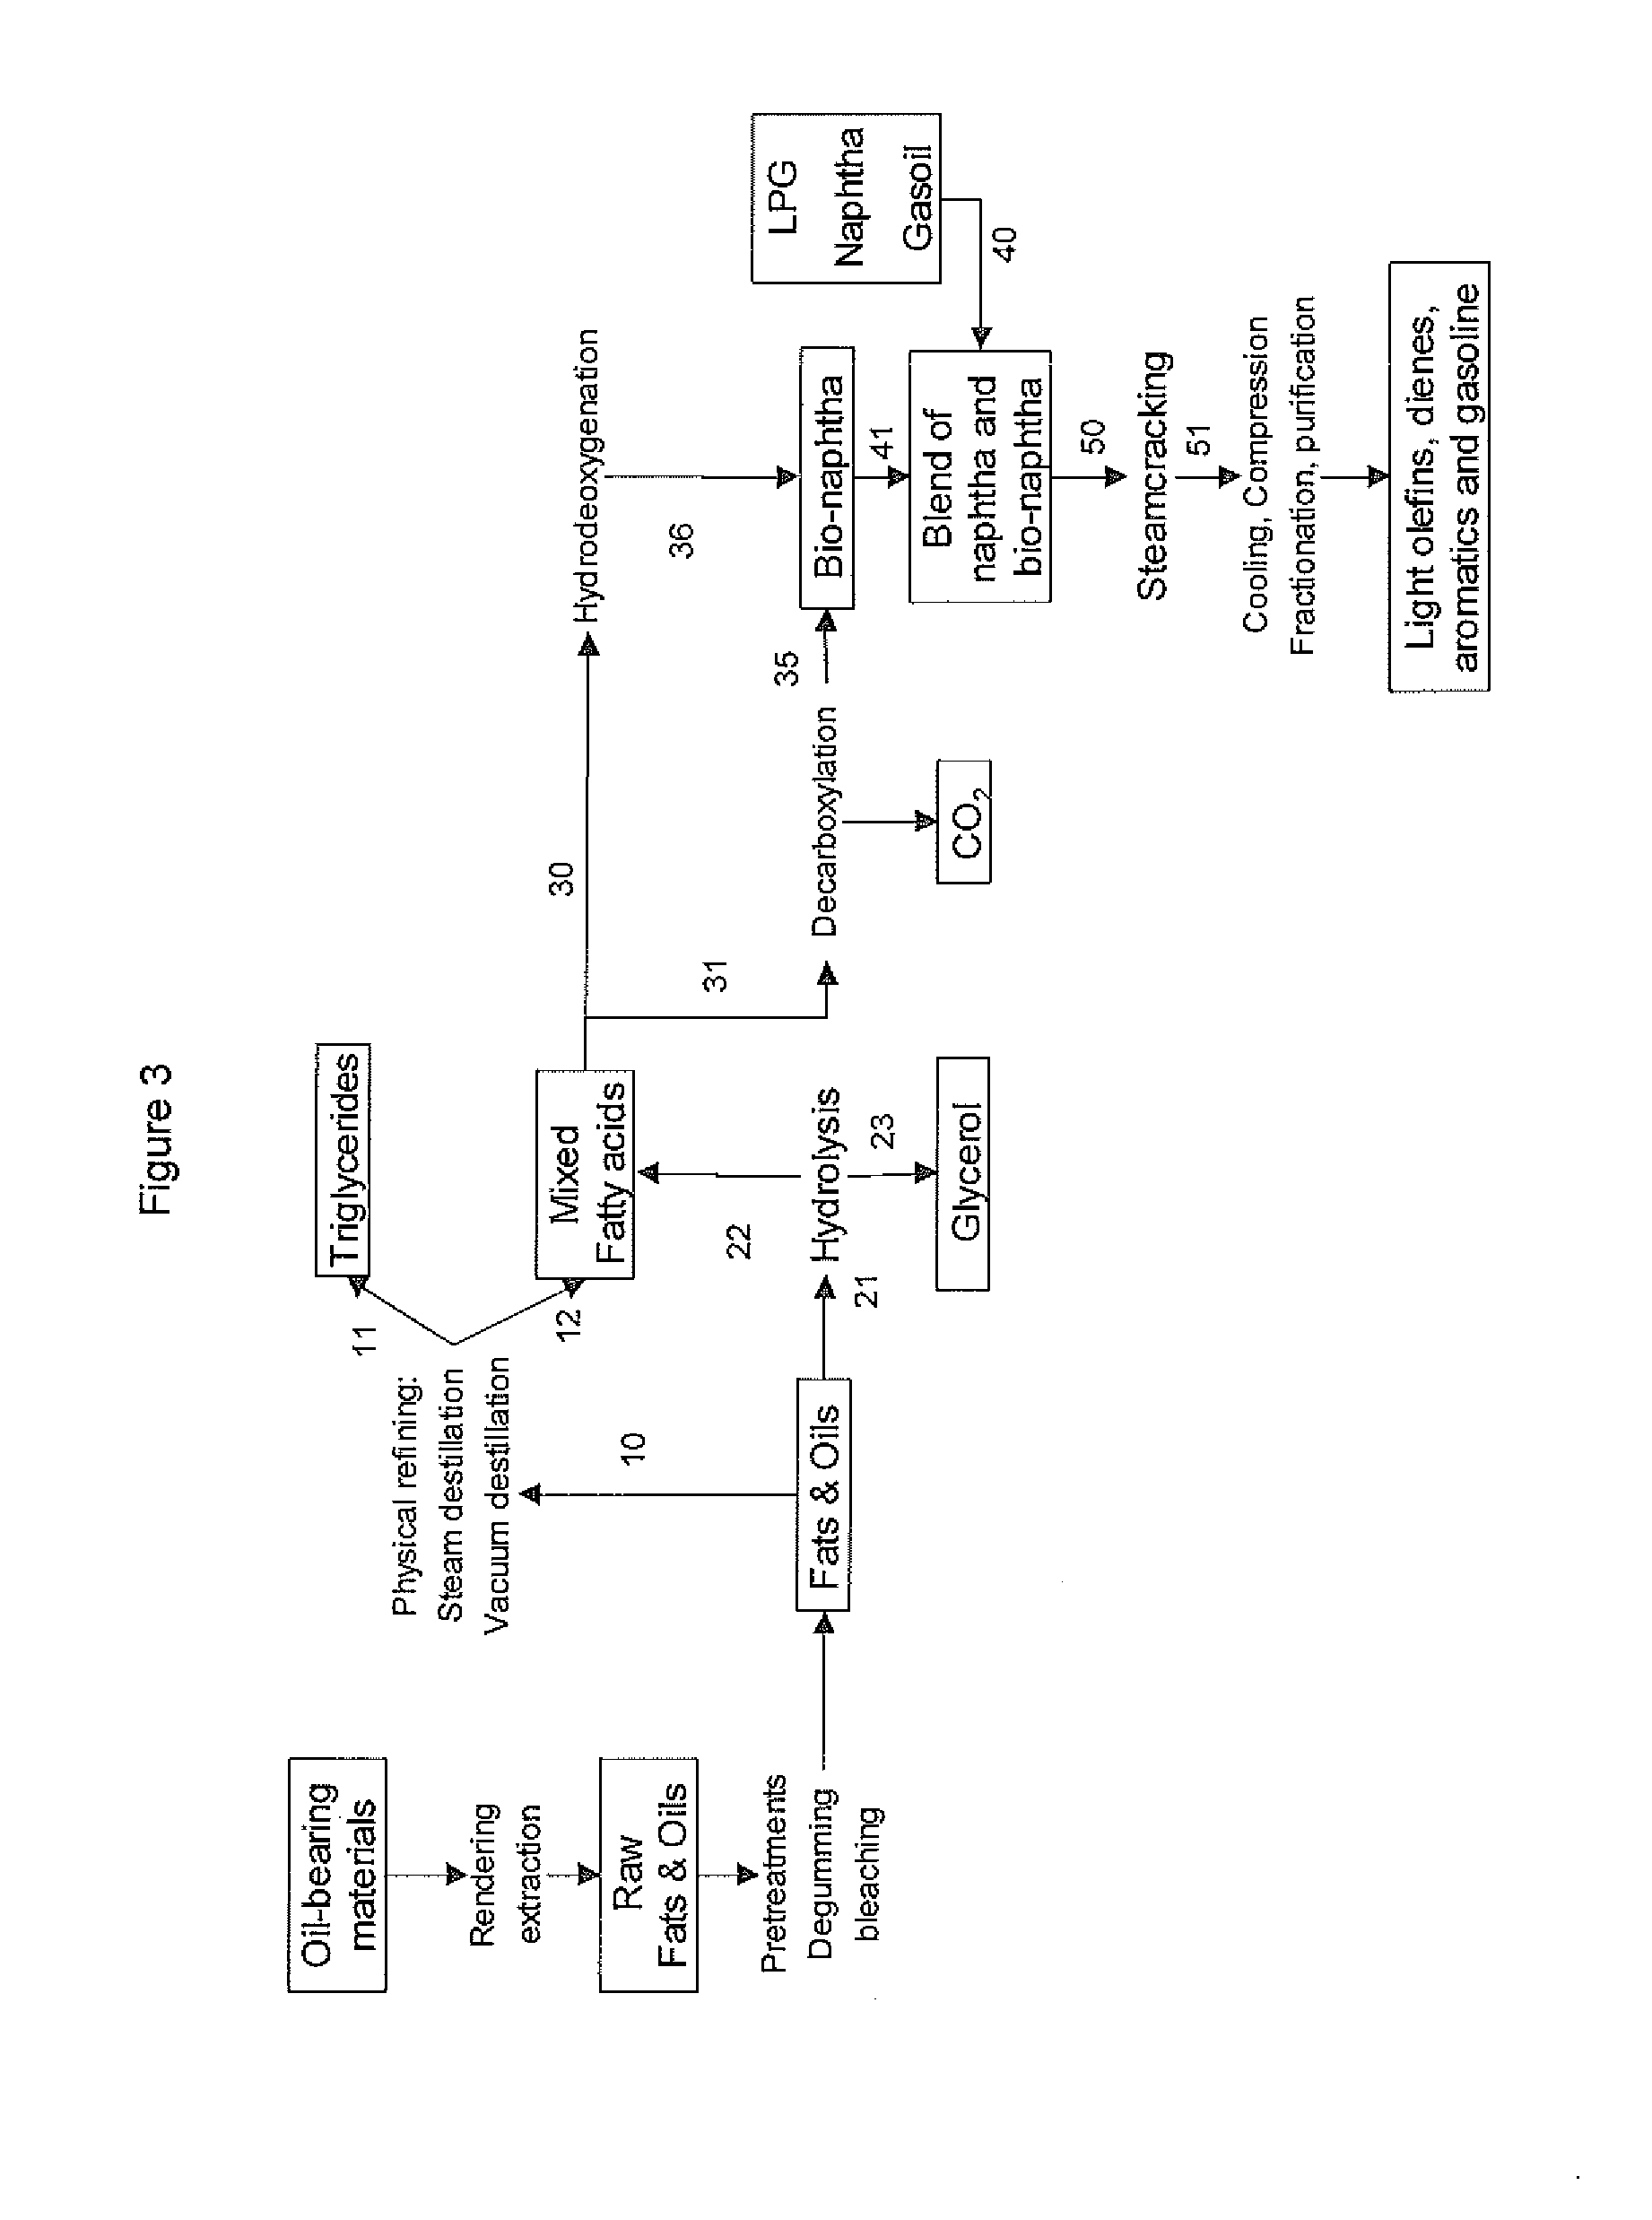 Process for the production of bio-naphtha from complex mixtures of natural occurring fats and oils